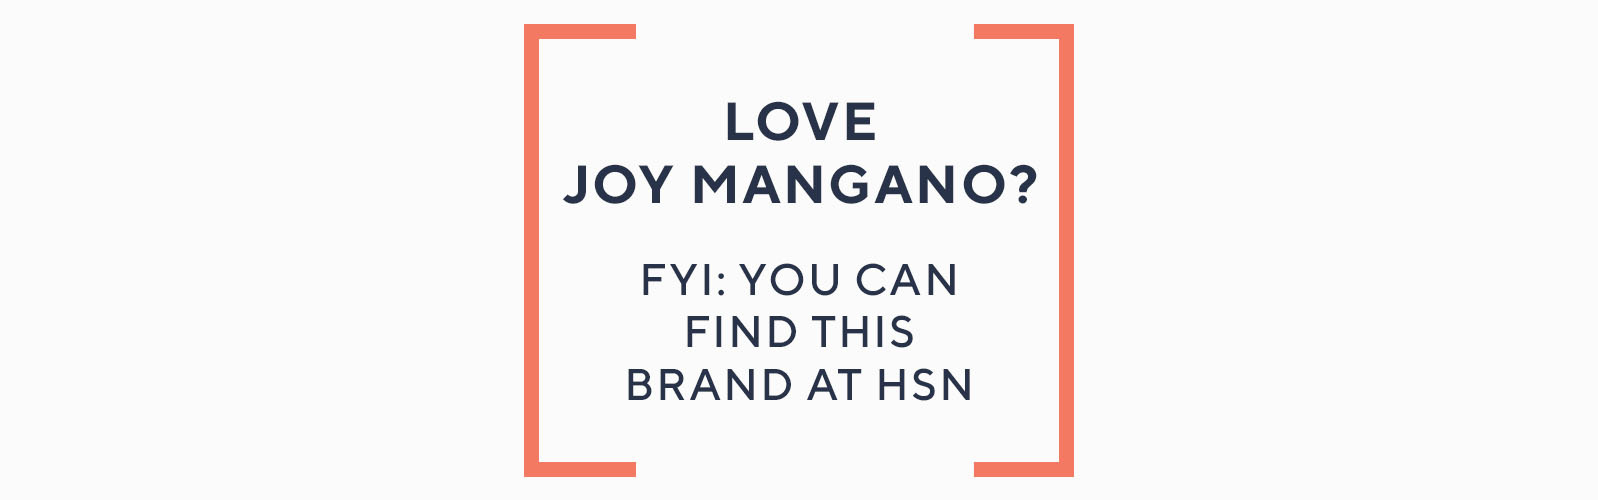 Love Joy Mangano?   FYI: You can find this brand at HSN